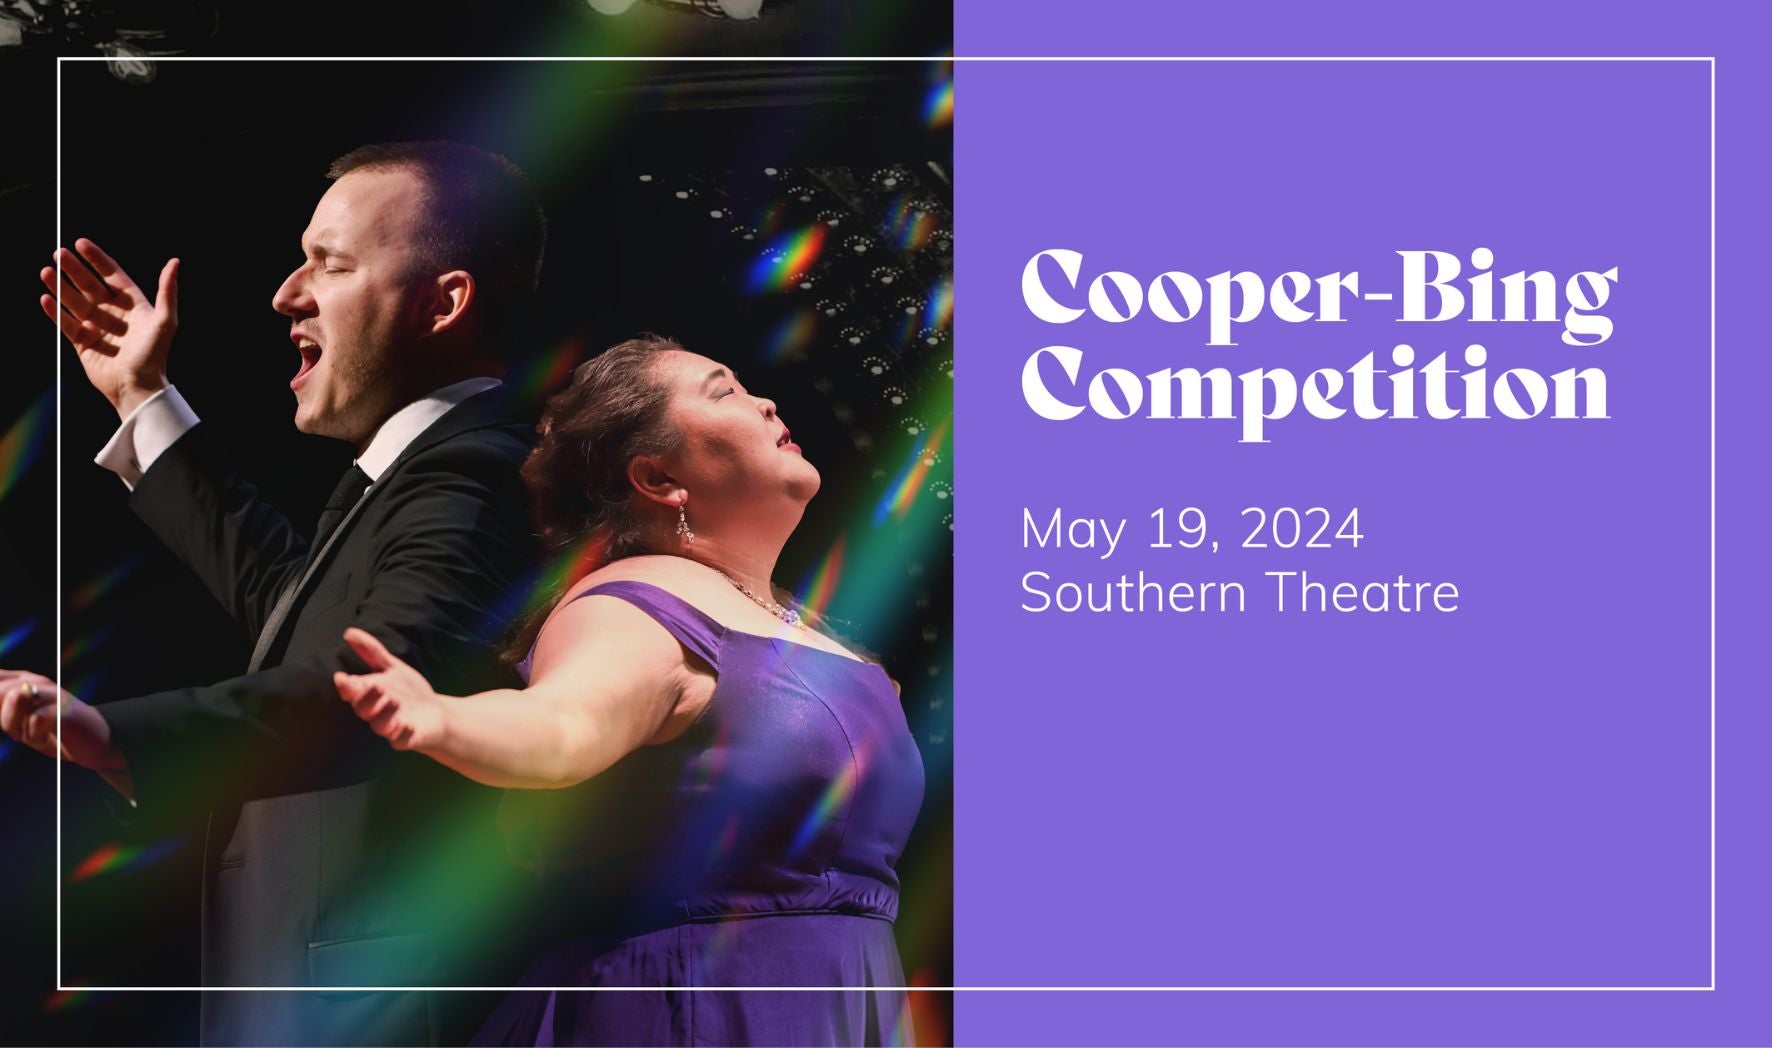 More Info for The Cooper-Bing Competition